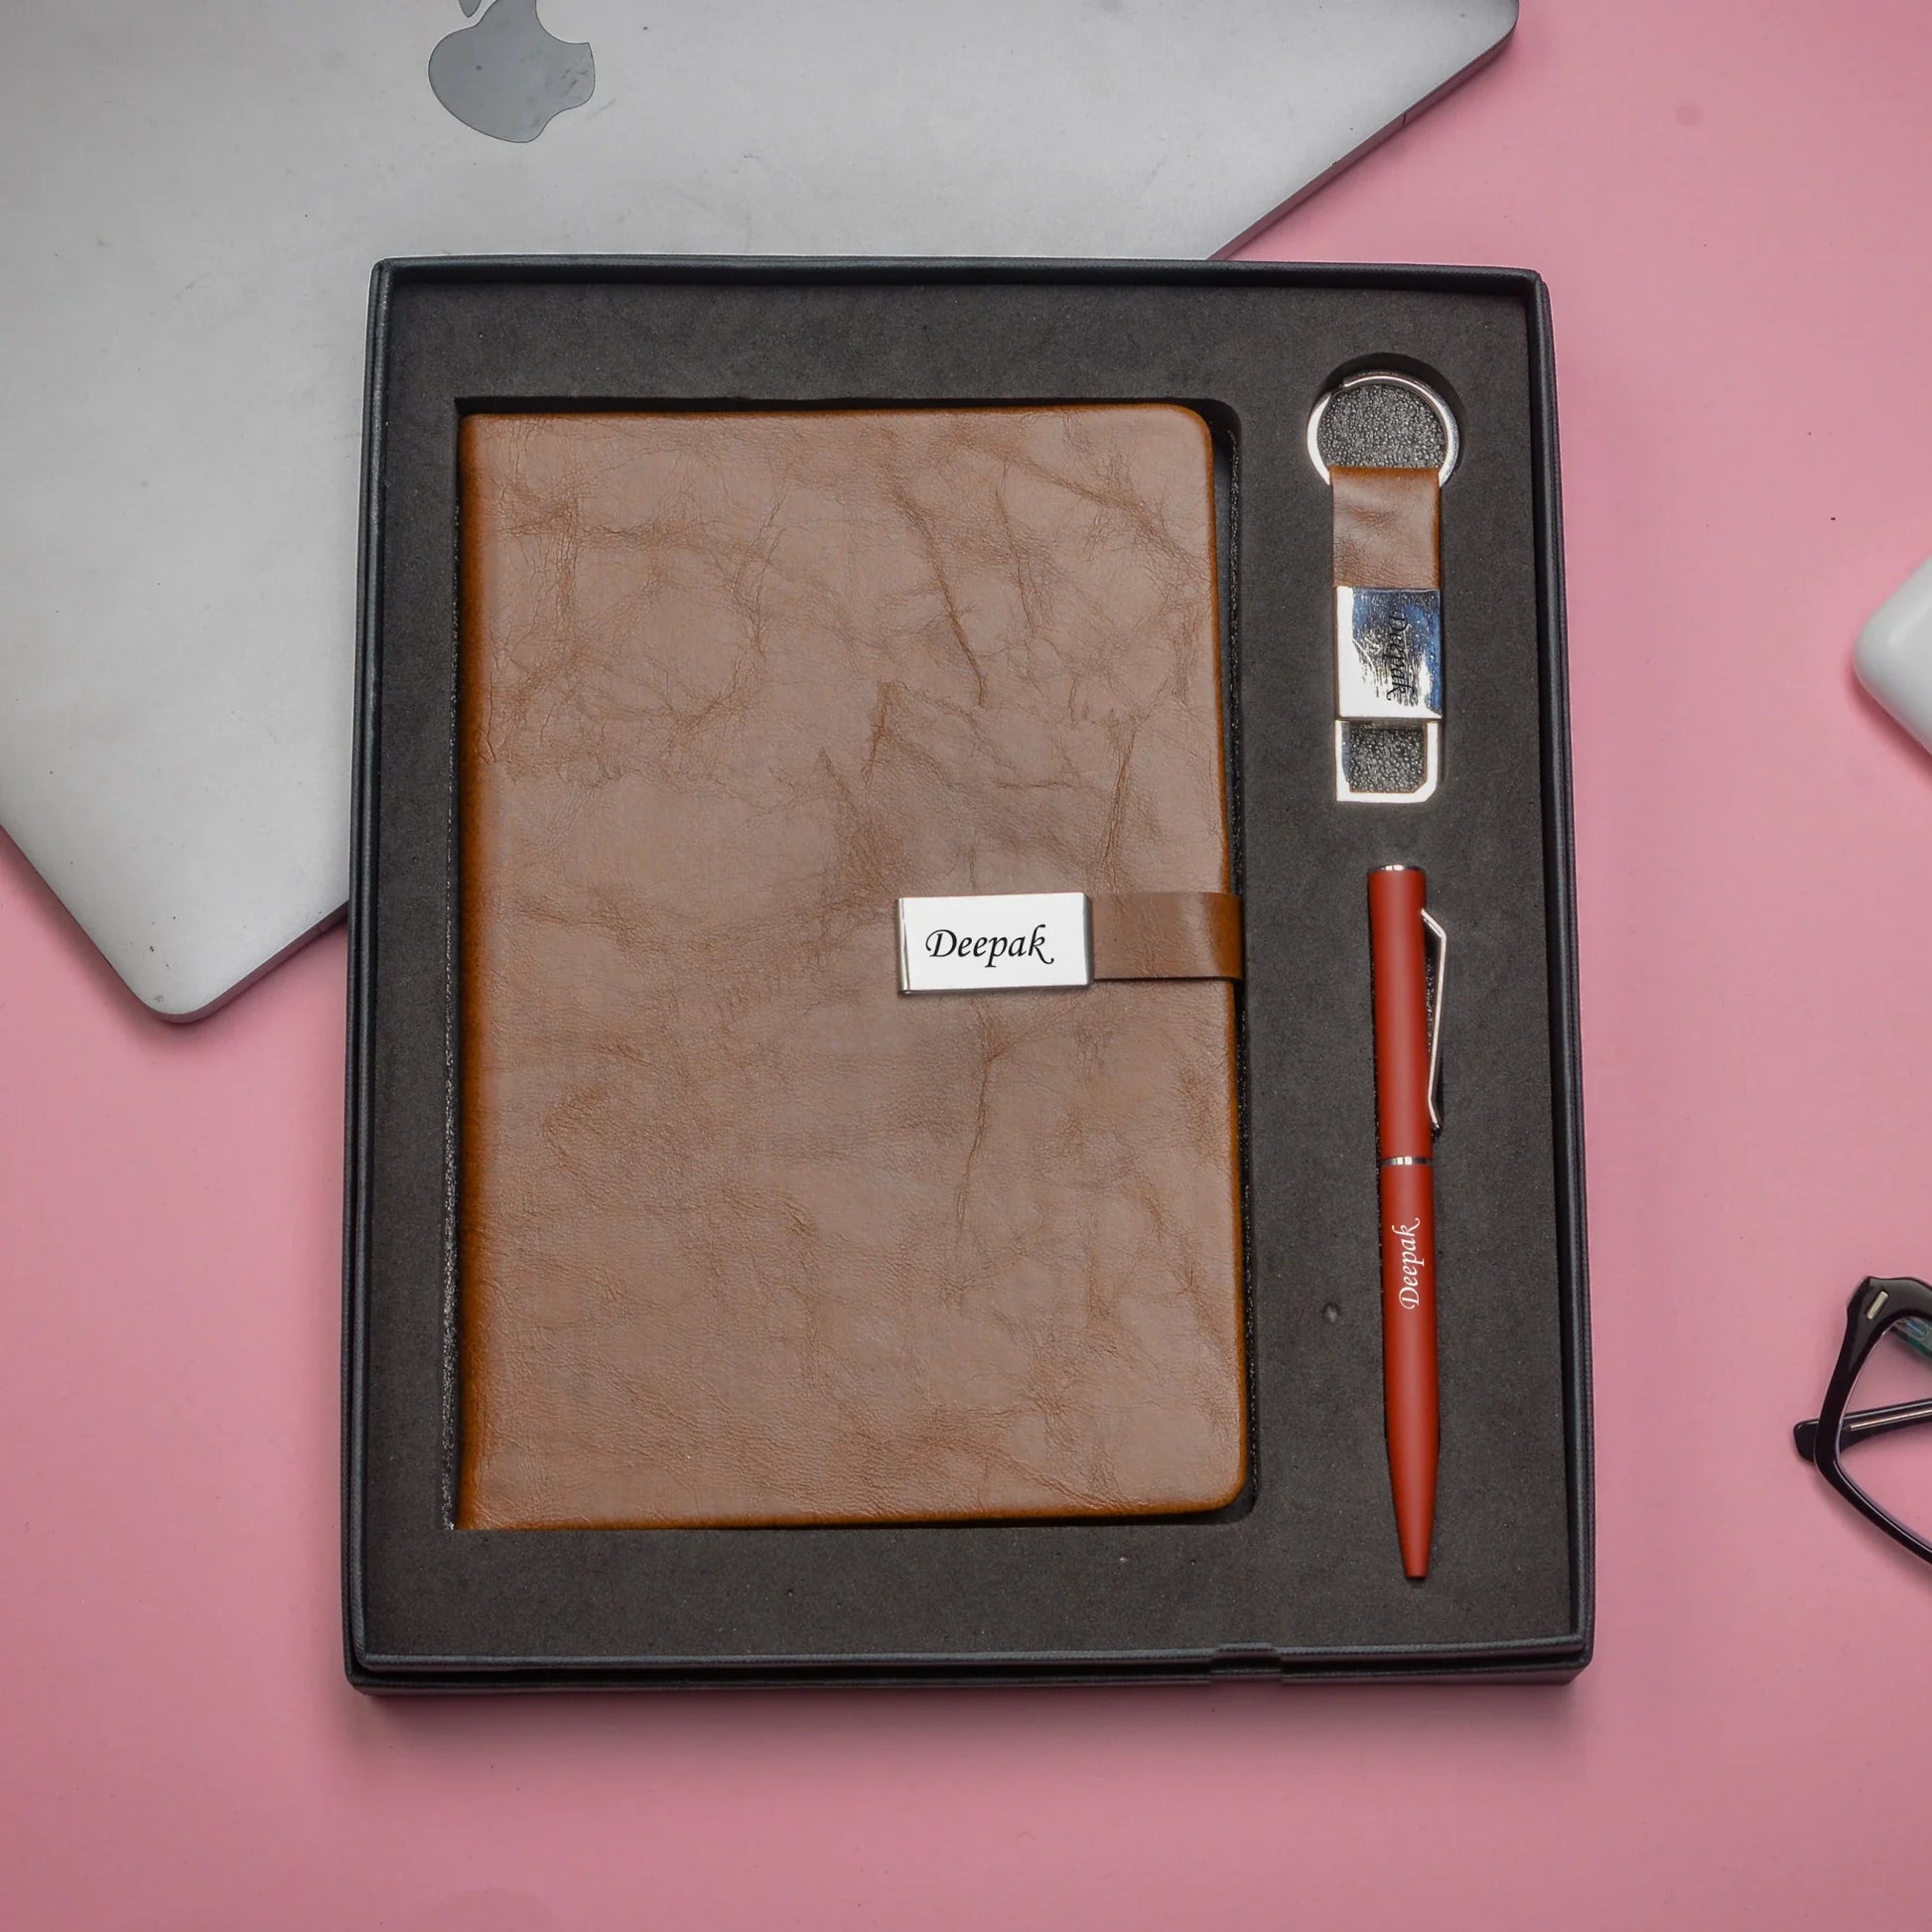 "Capture your thoughts, ideas, and memories with our comprehensive corporate set. Our versatile diary, smooth pen, and sturdy keychain will keep your life organized and on track."